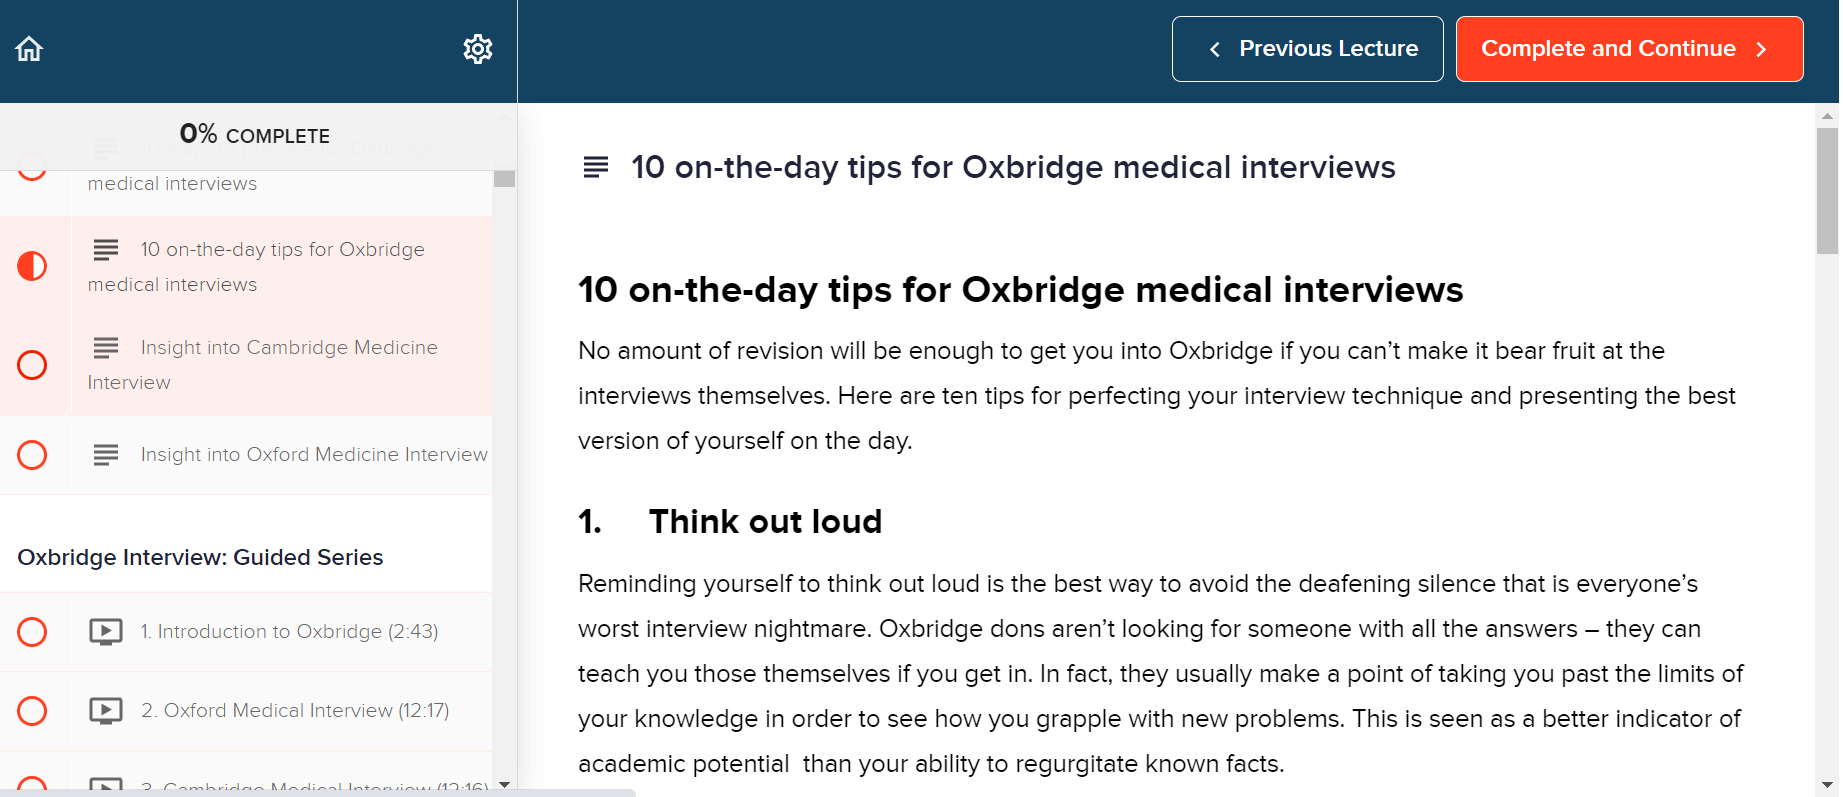 10 on-the-day tips for Oxbridge medical interviews